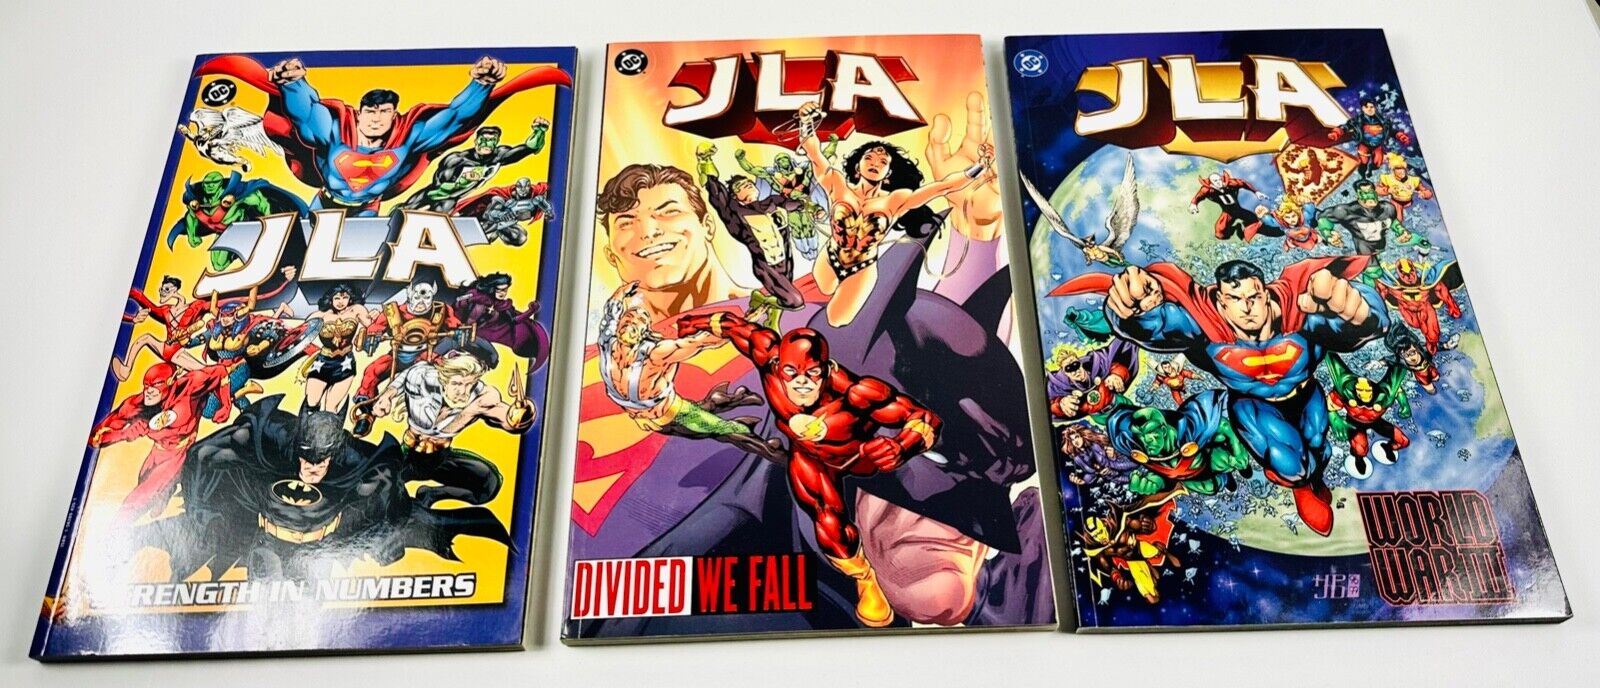 DC Comics JLA - Strength in Numbers, Divided We Fall, World War III - MINT COND